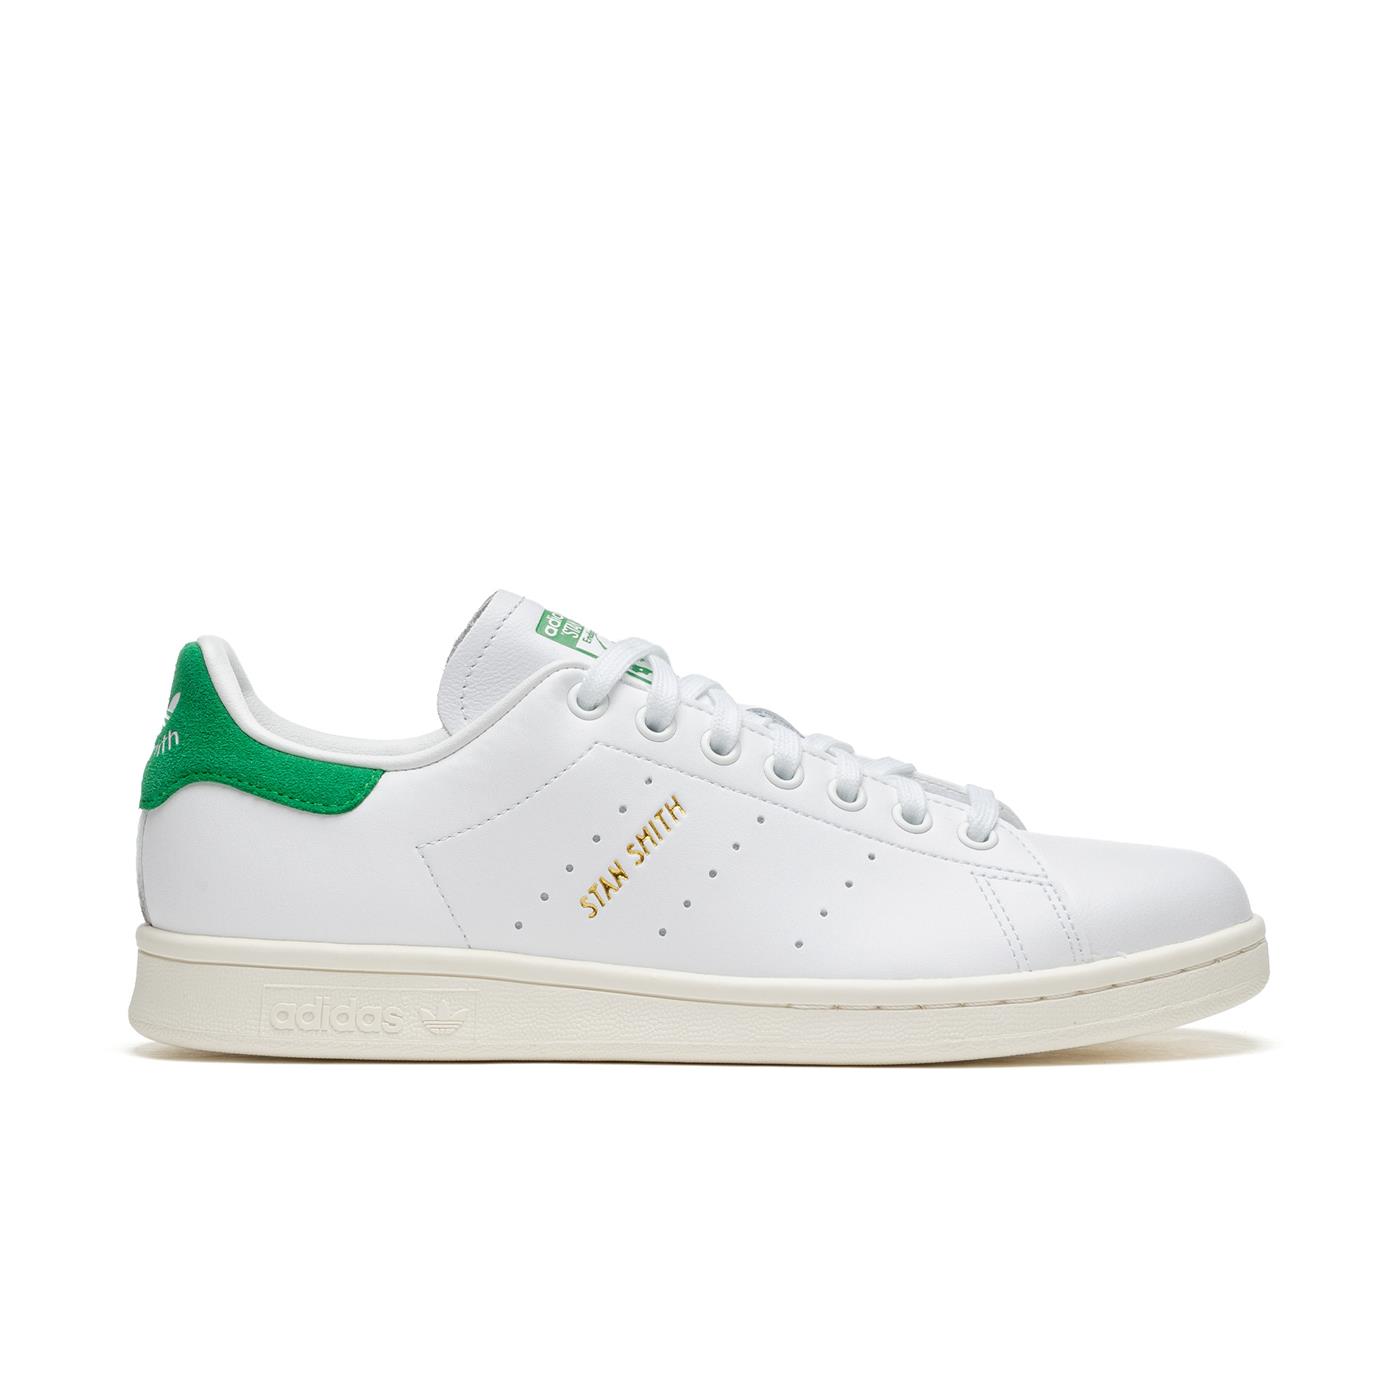 kasteel Oude tijden familie Adidas ZX Alkyne White Blue Coral Footwear White Footwear White Blue |  GW1390 | RvceShops | Sneakers ADIDAS Stan Smith White for Man